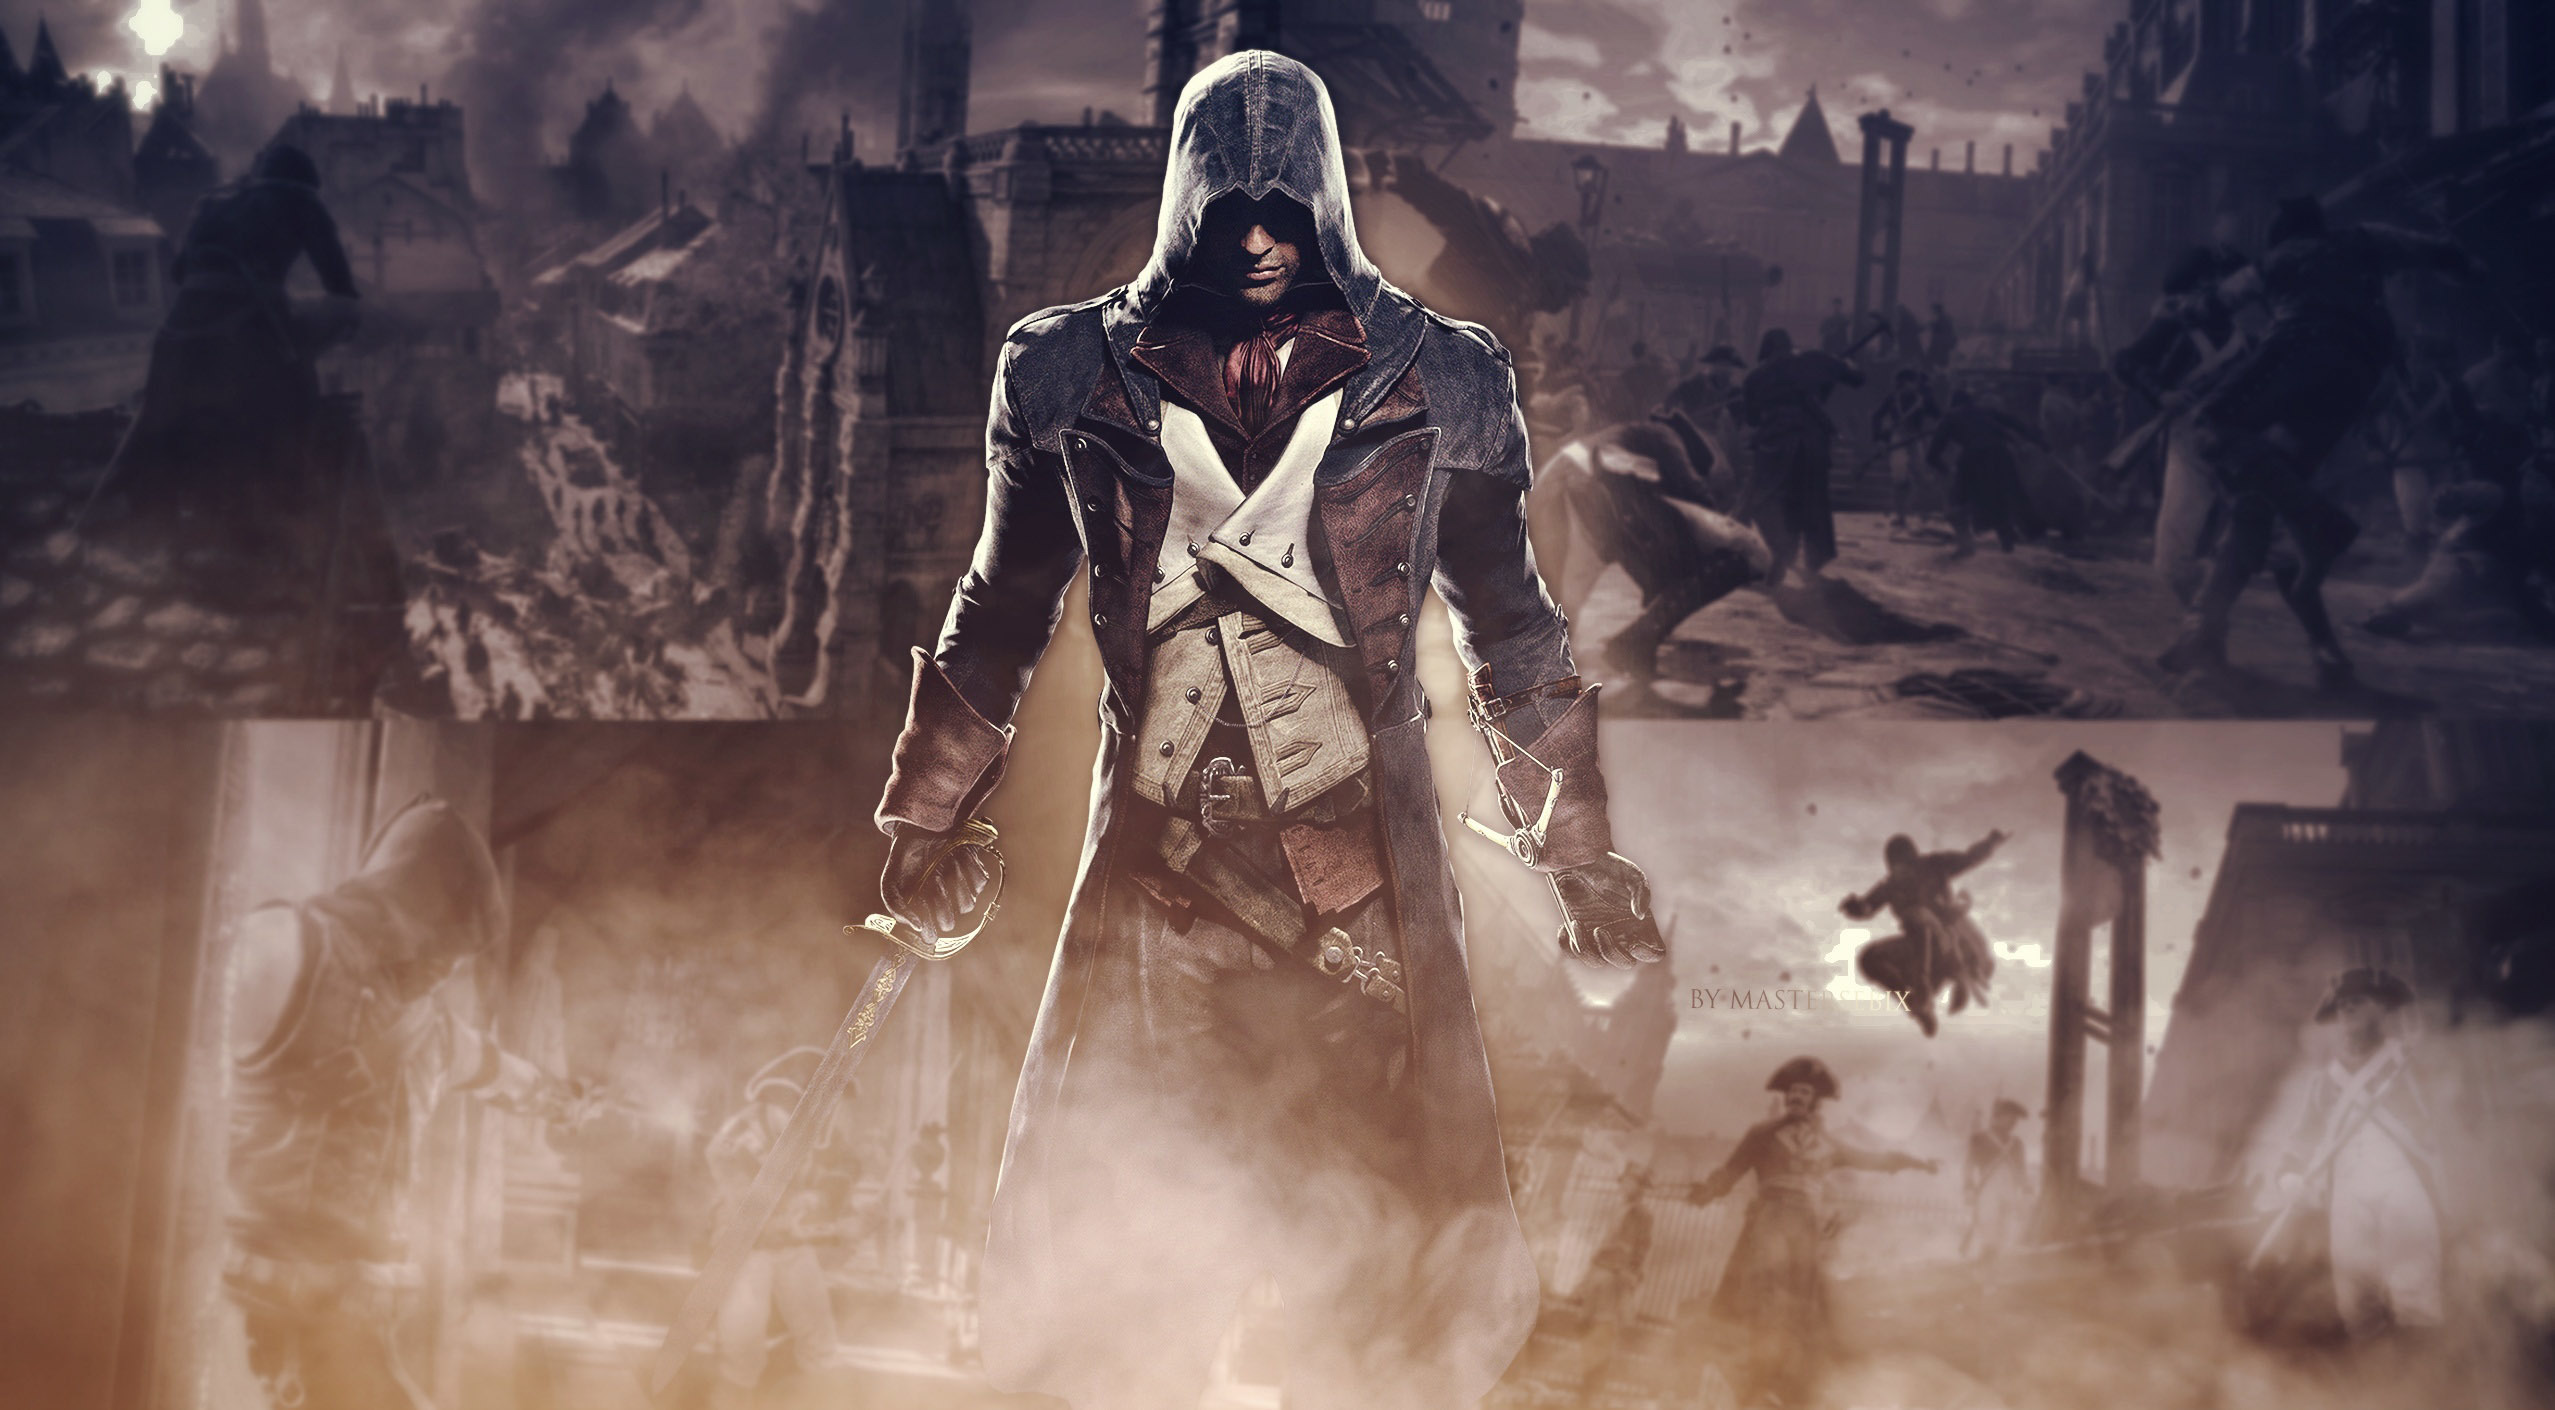 Wallpaper ID 336036  Video Game Assassins Creed Unity Phone Wallpaper   1440x2560 free download